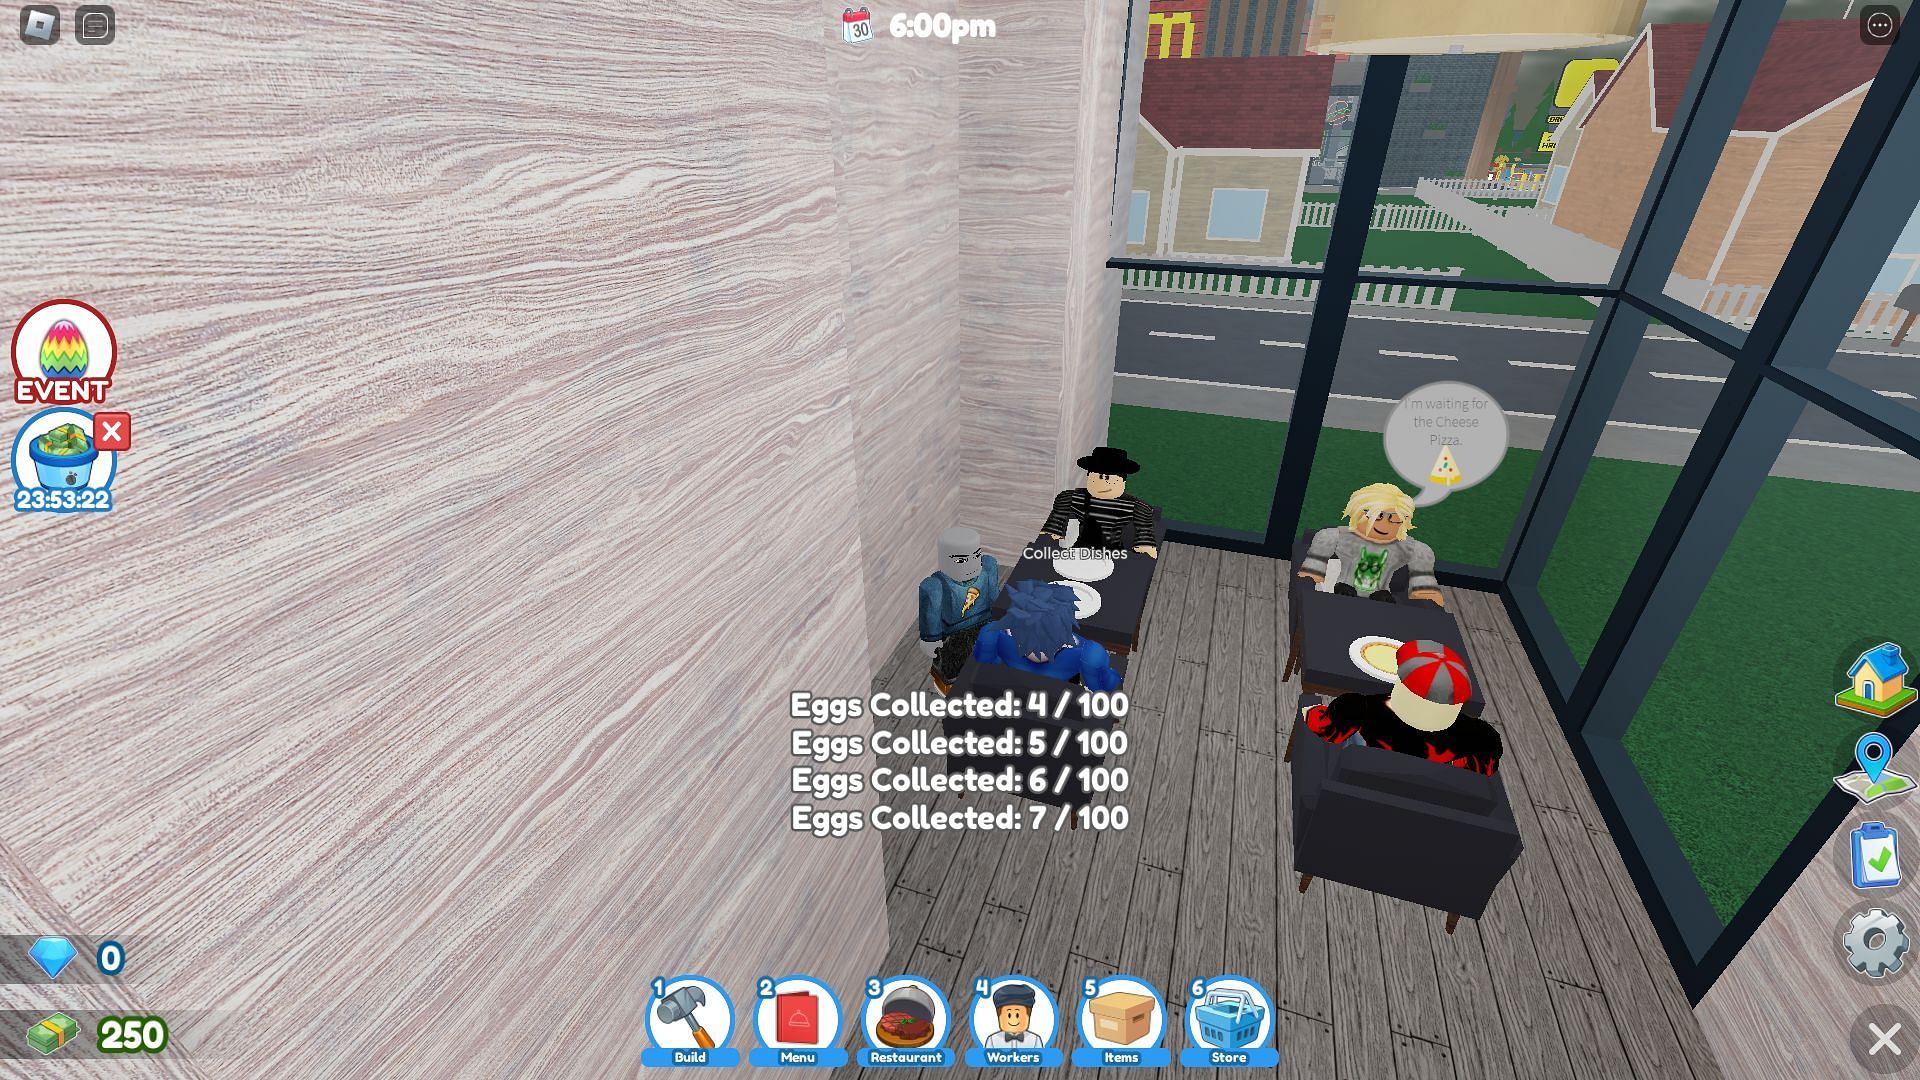 Collecting golden eggs for The Hunt (Image via Roblox)